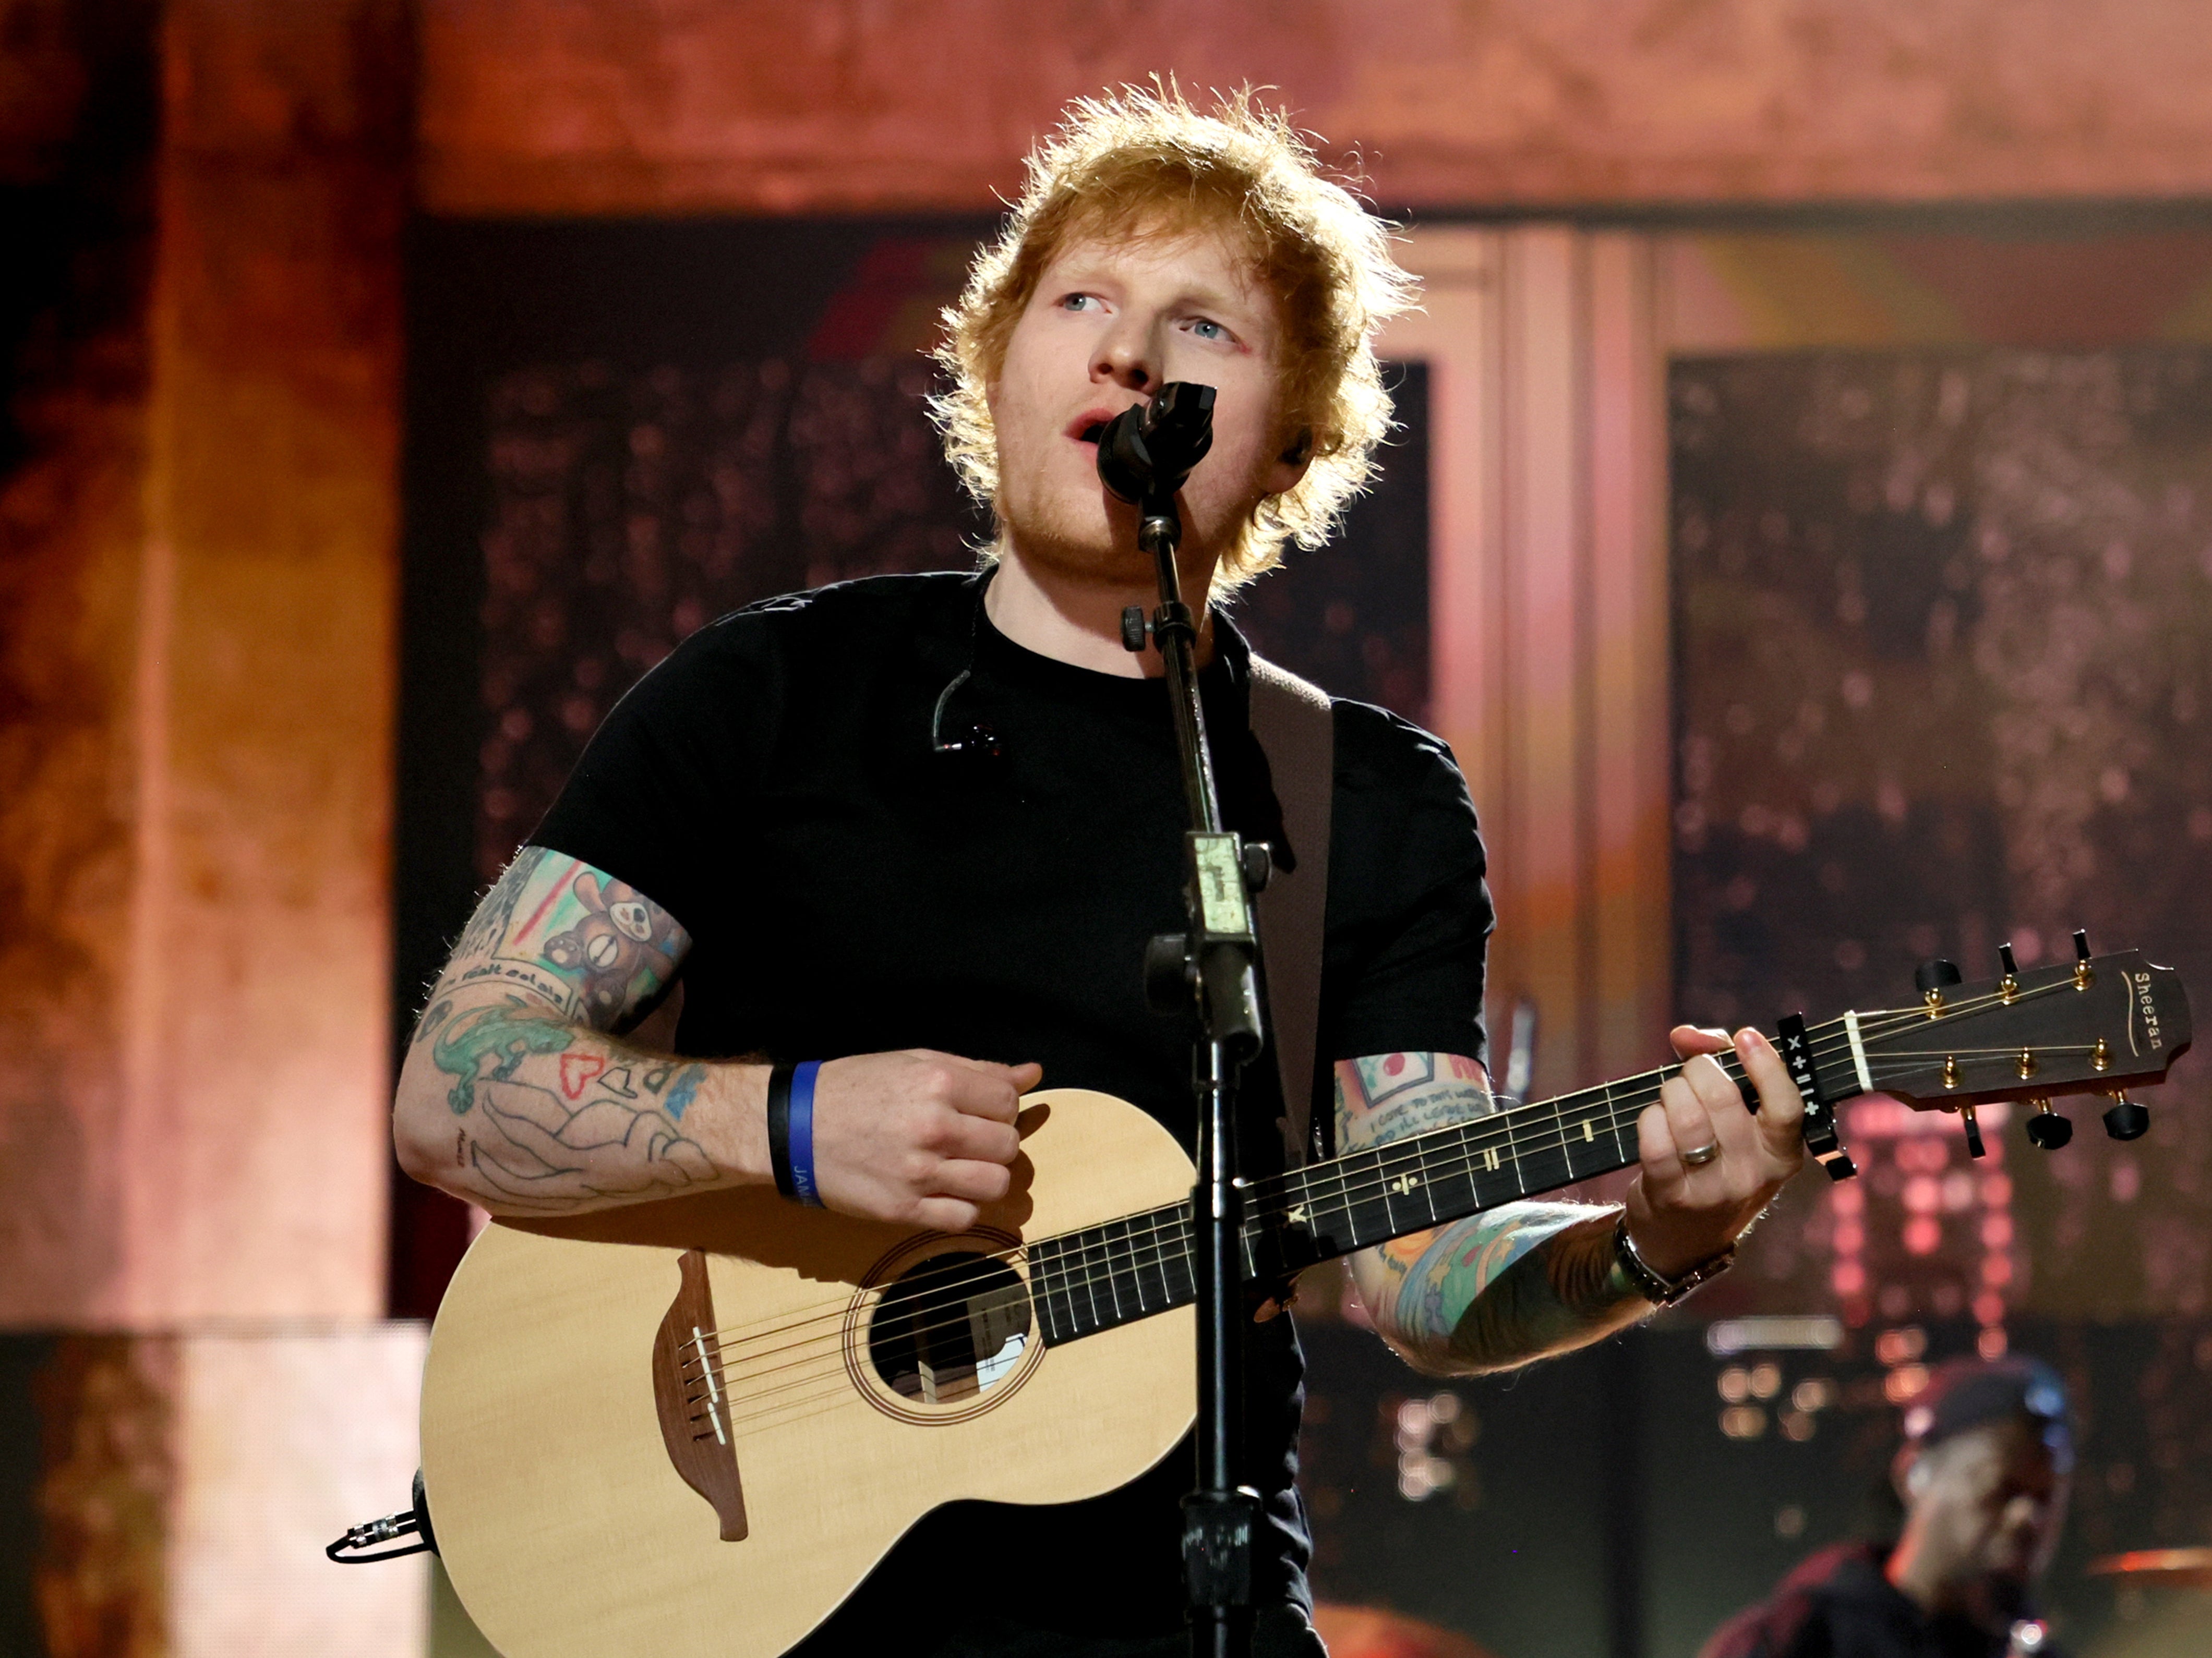 Ed Sheeran started his career playing in small grassroots music venues